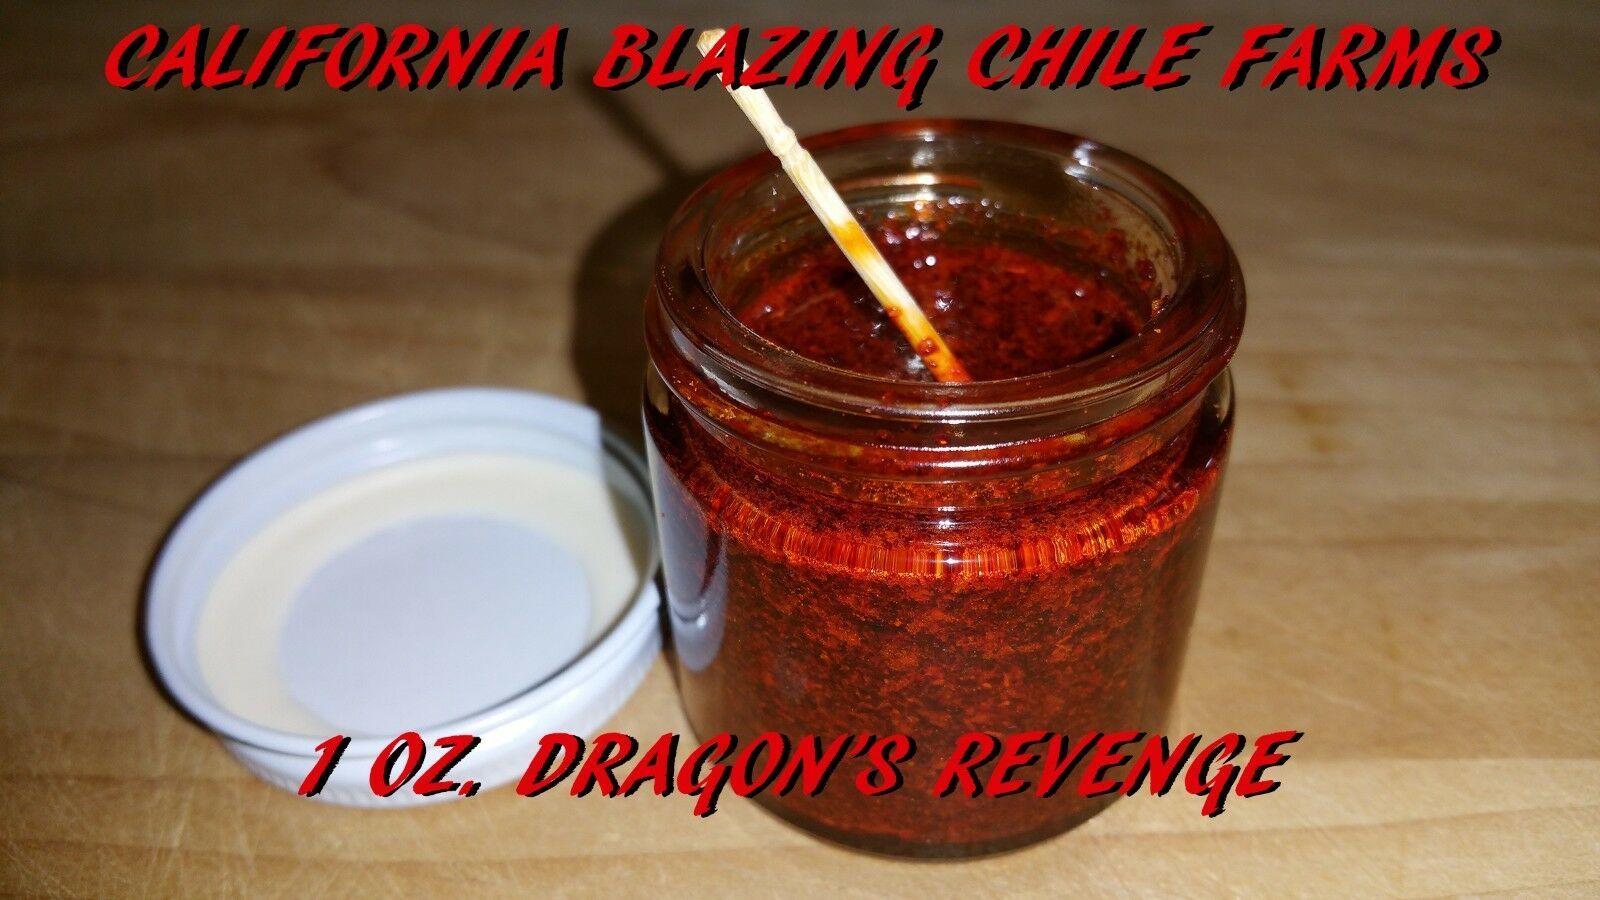 Dragon's Revenge - Nuclear Hot! Not for untrained palate. GUARANTEED PAIN!!!!!! - $25.00